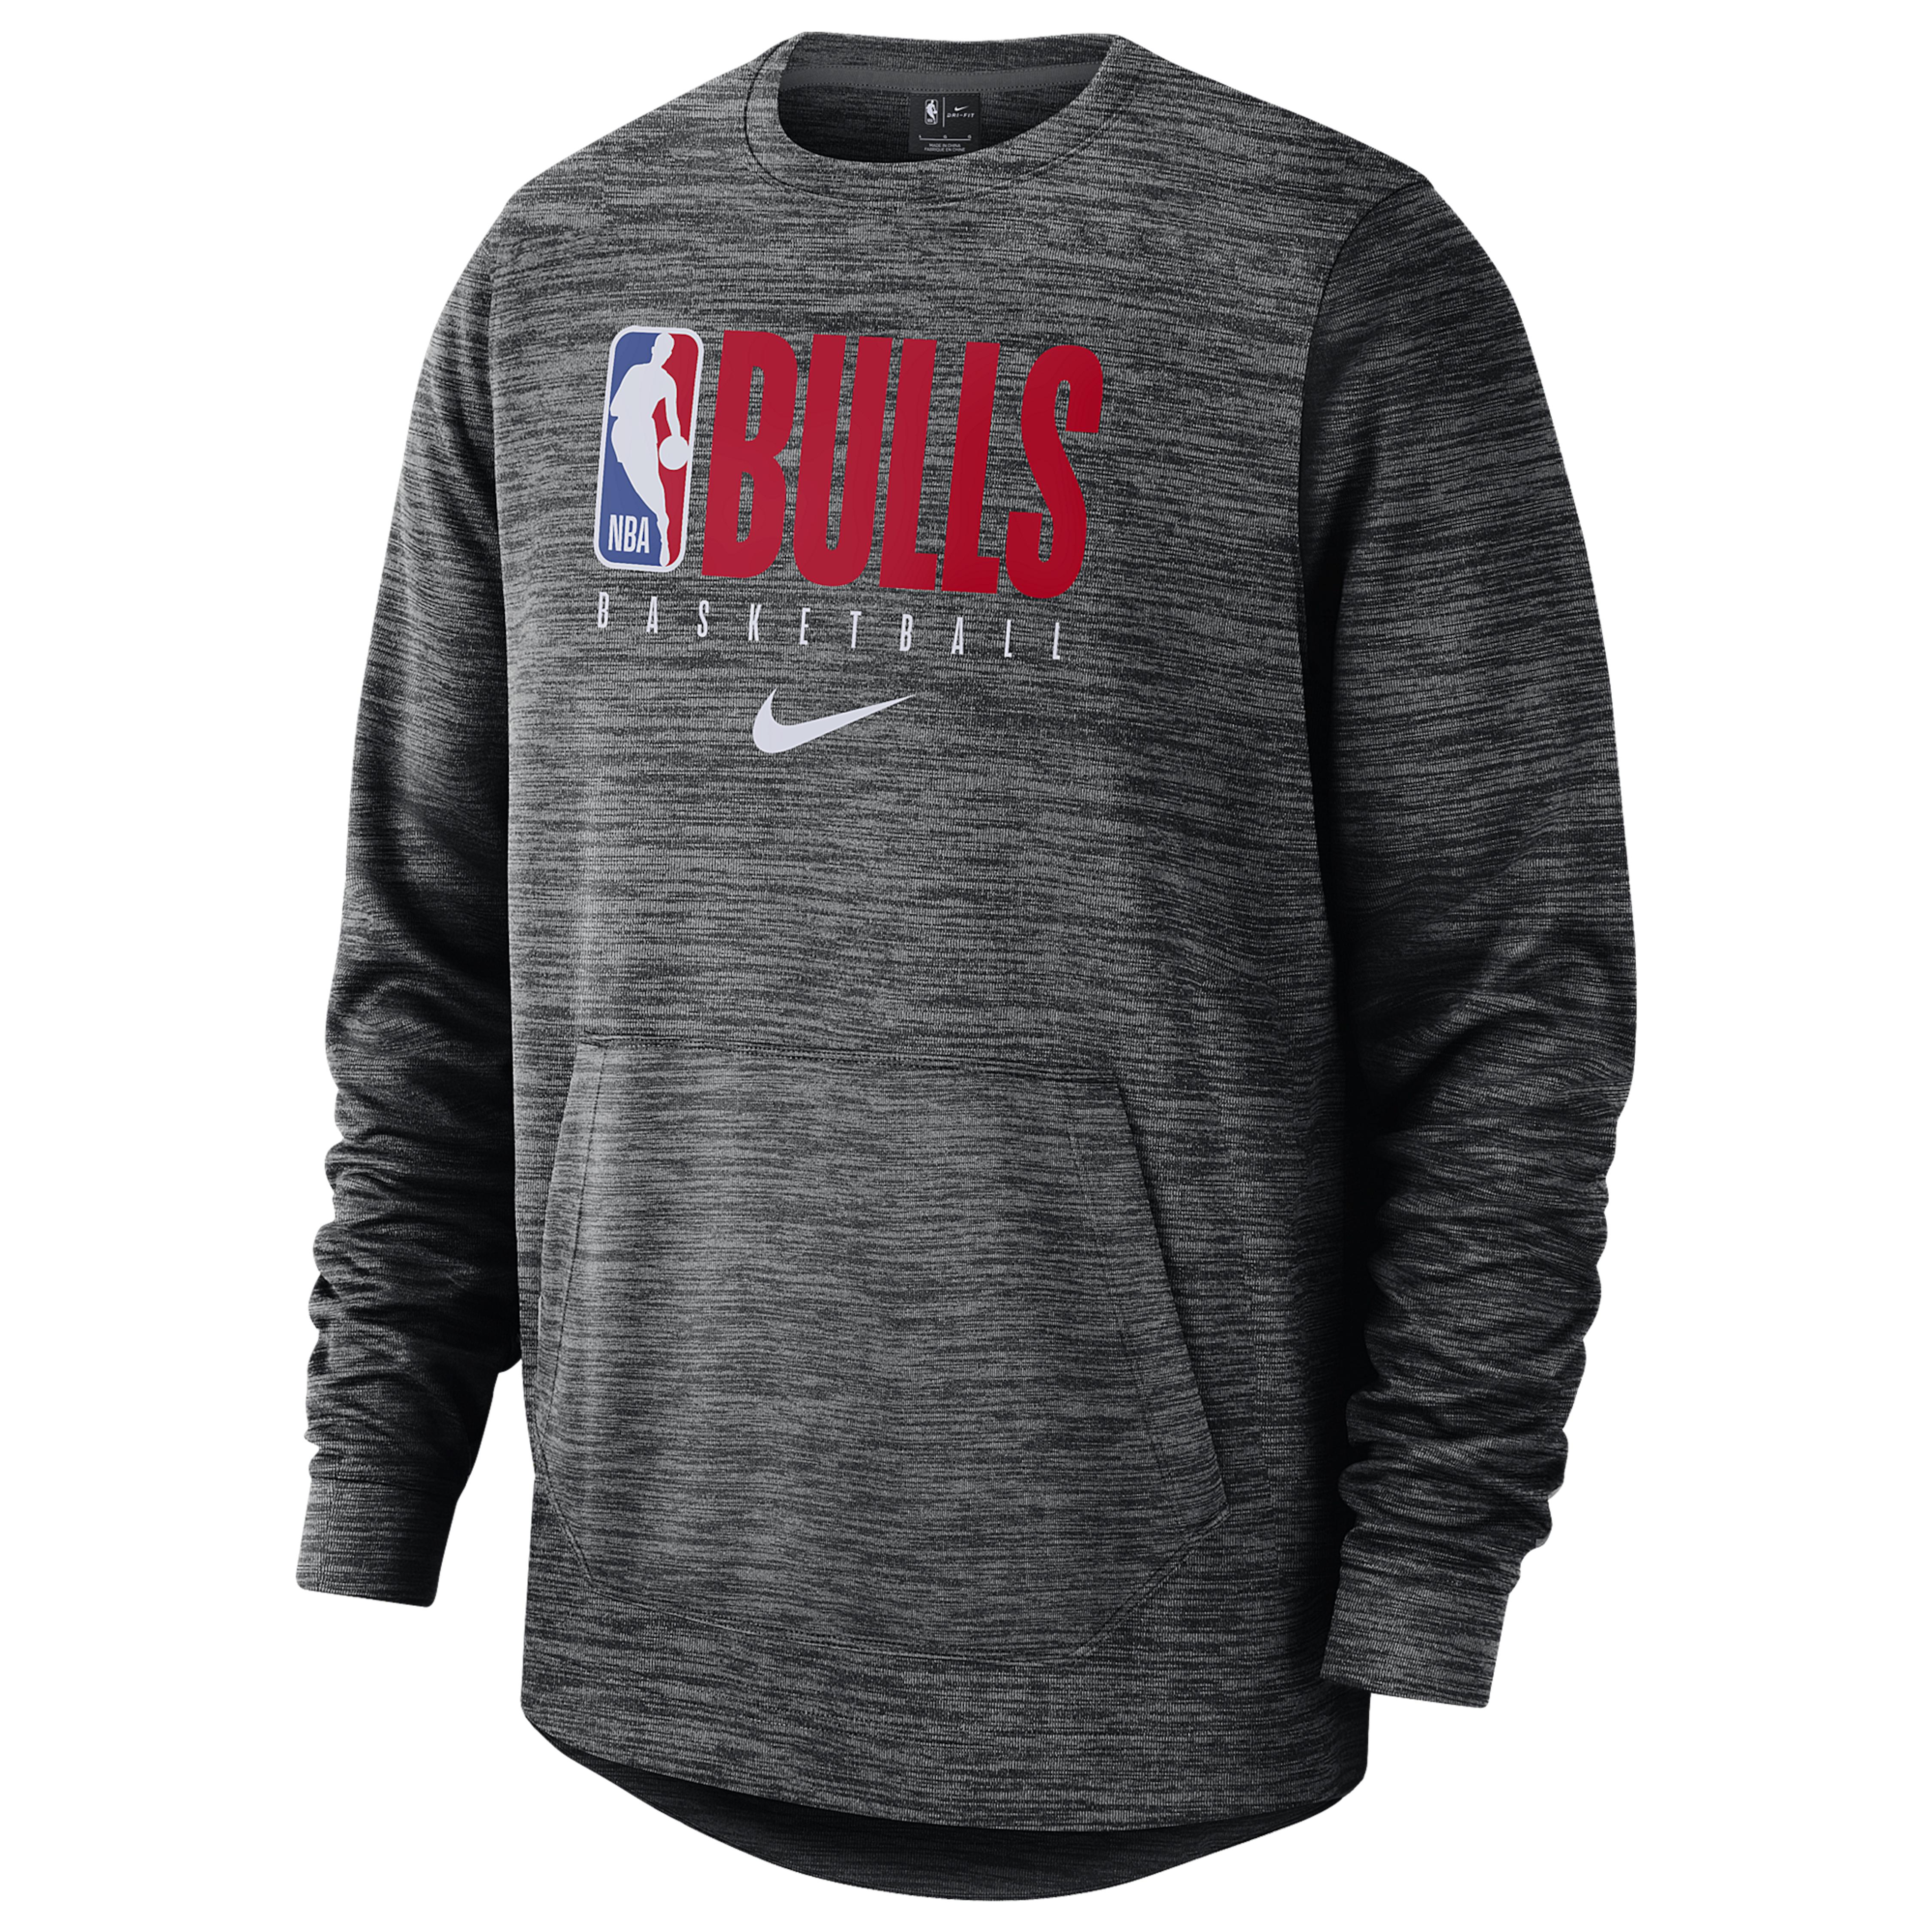 Nike Synthetic Nba Spotlight Pullover Crew in Black Heather/Pewter ...